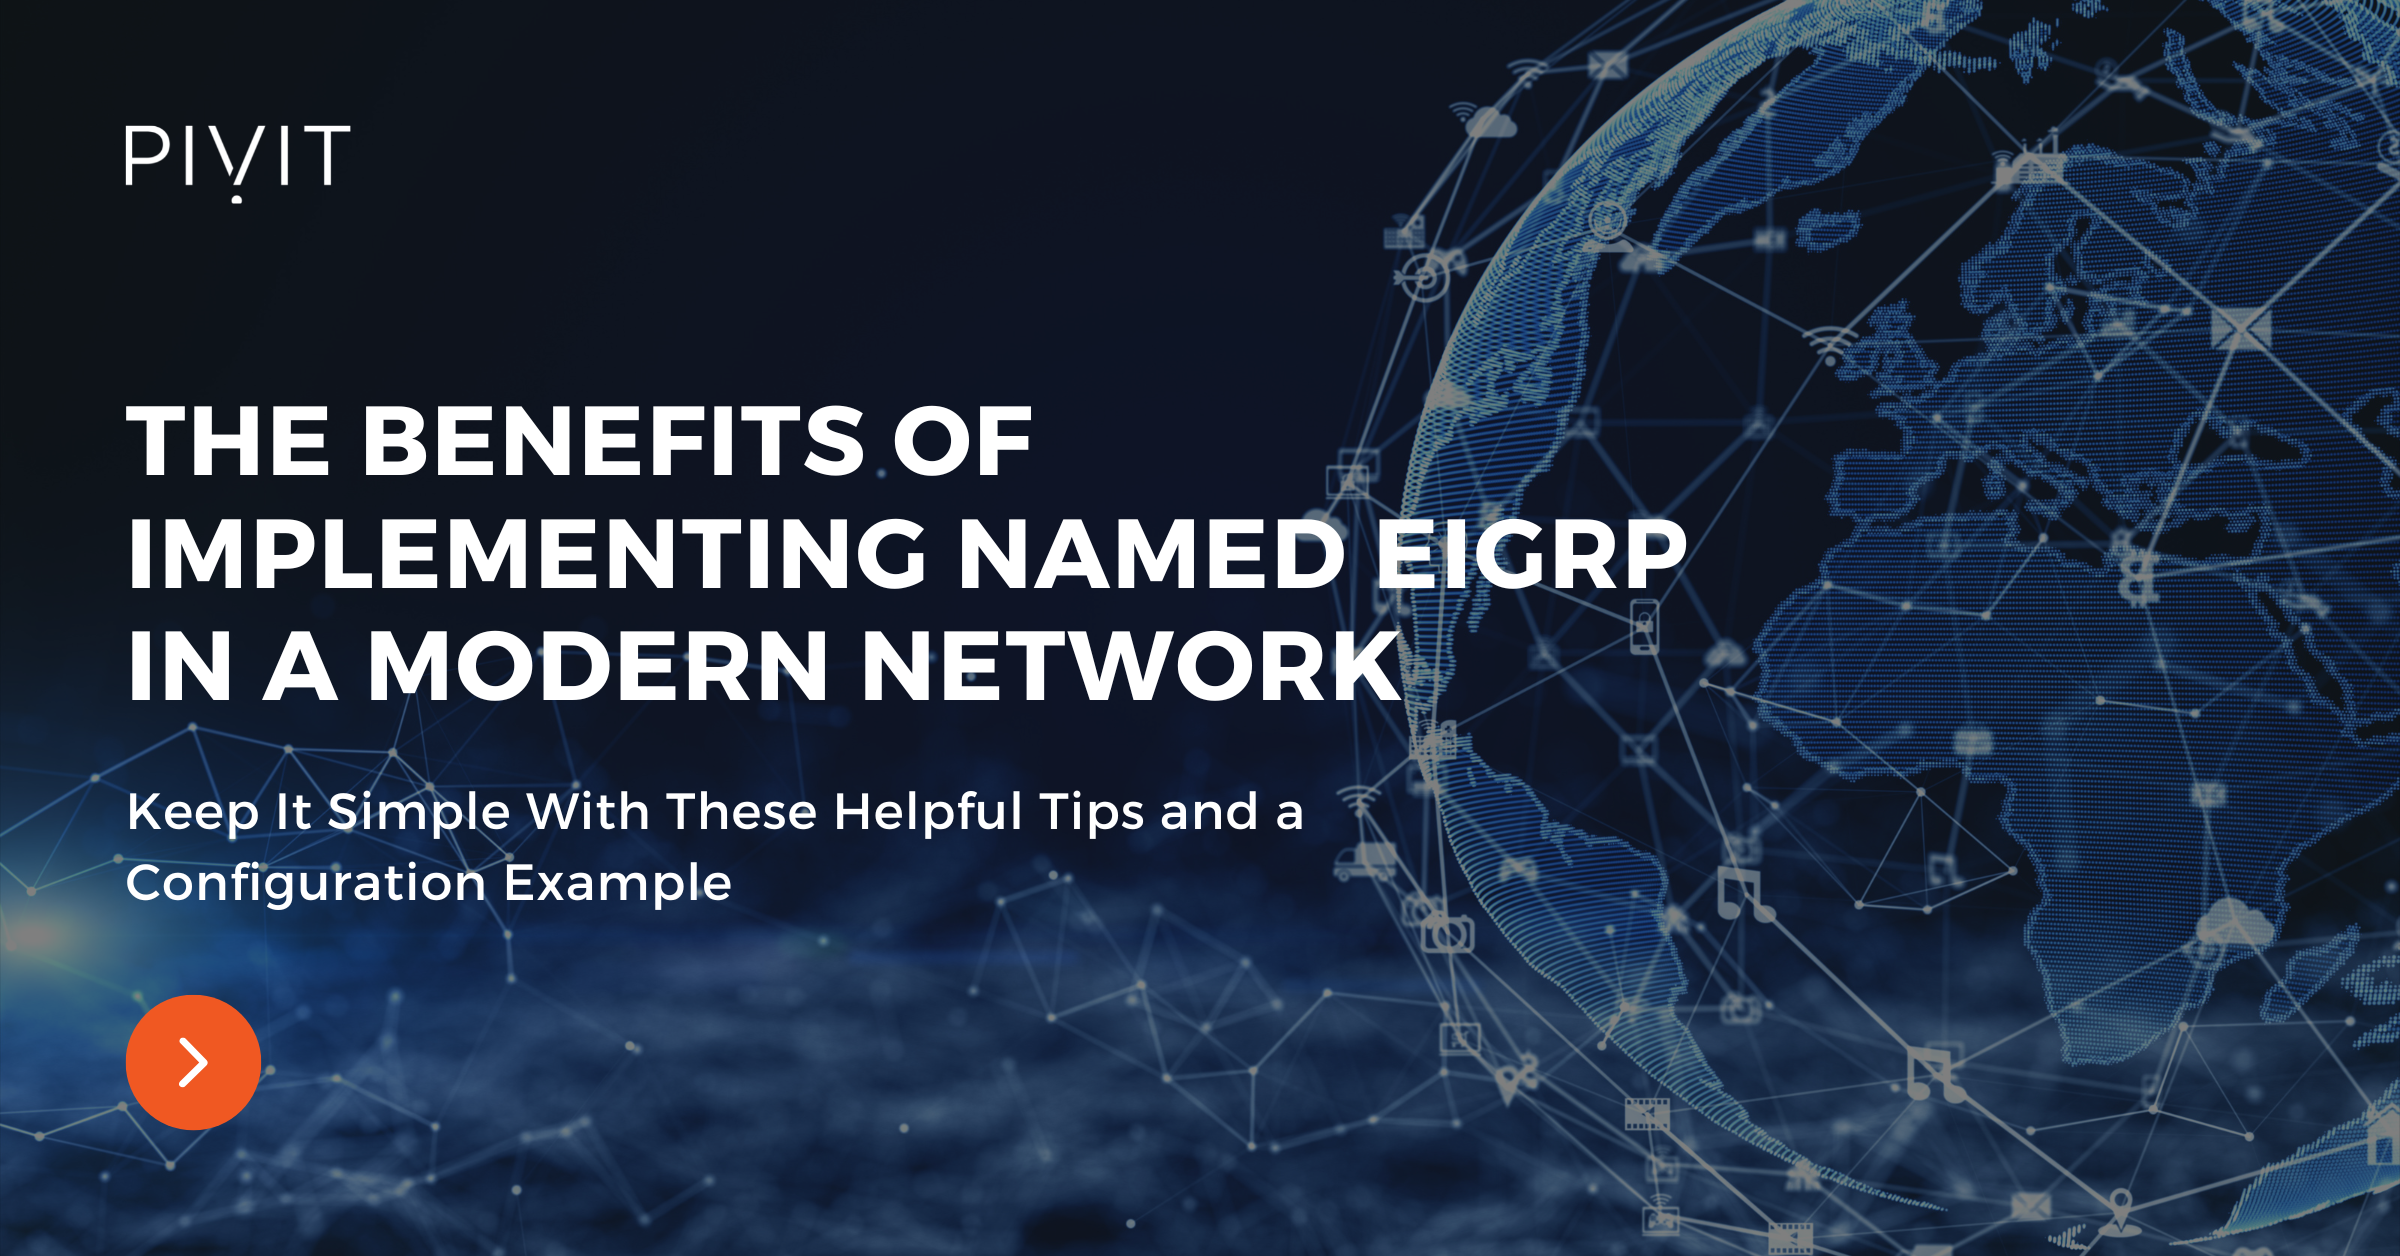 The Benefits of Implementing Named EIGRP in a Modern Network